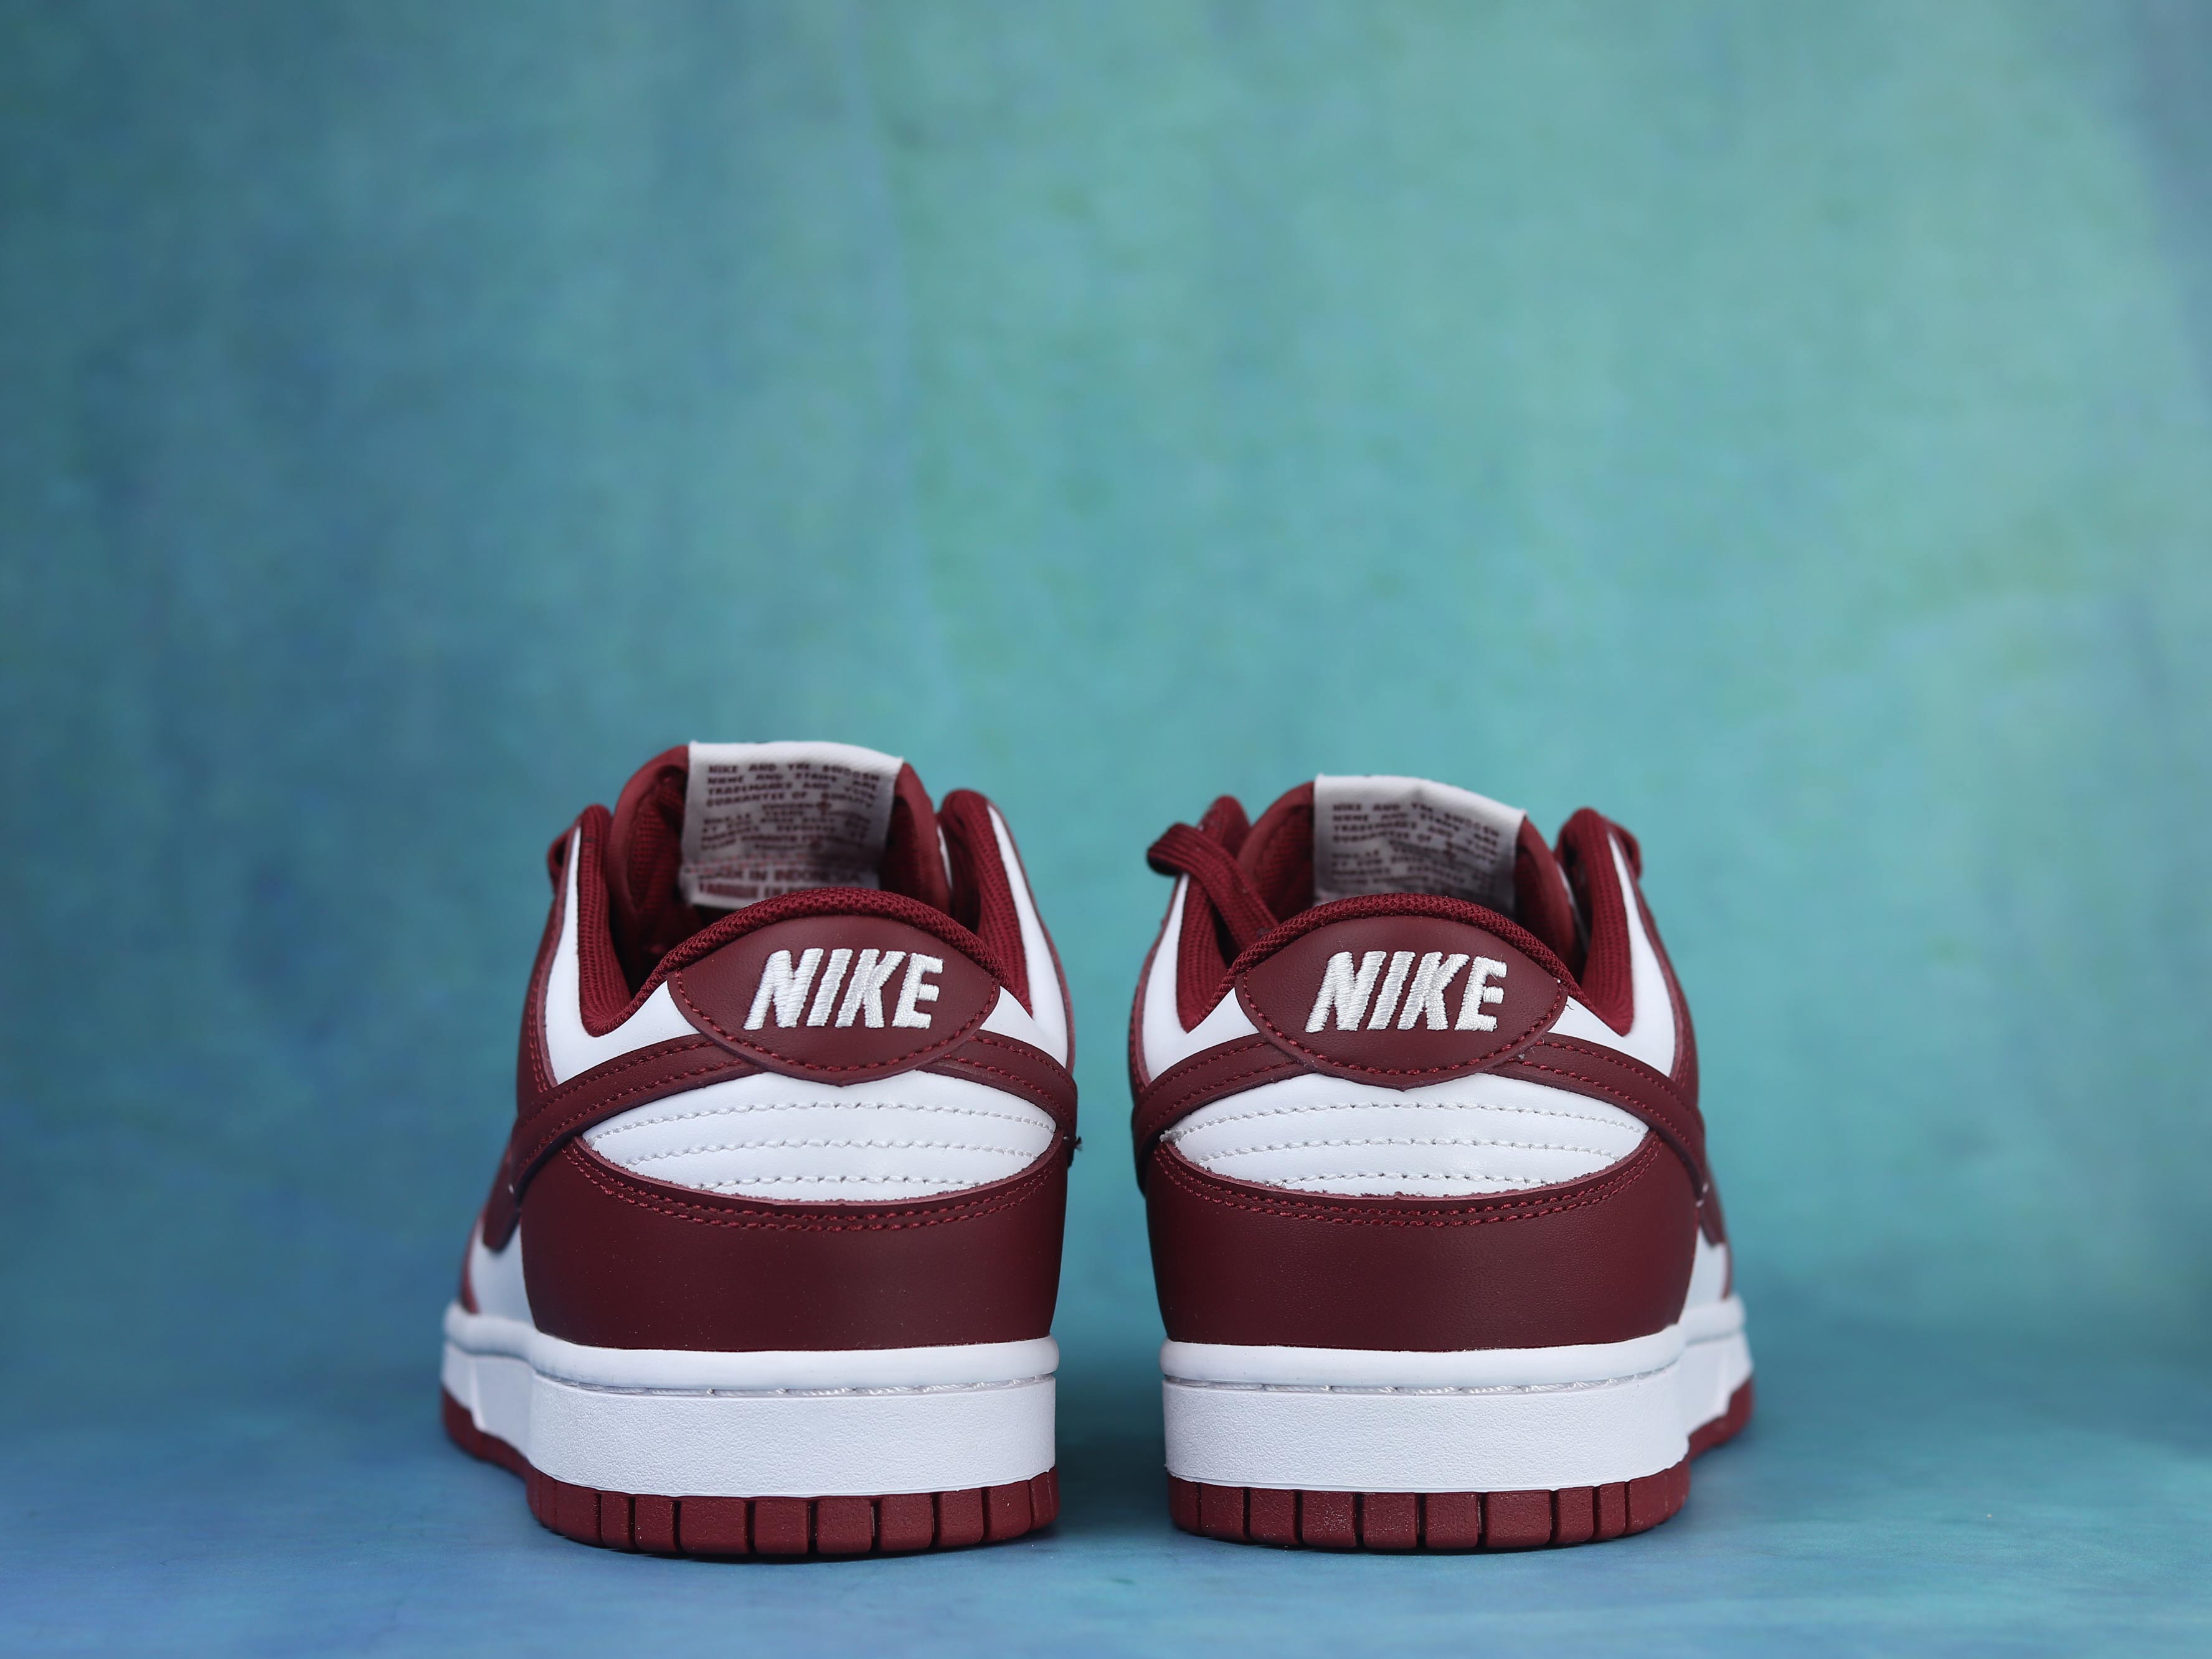 Dunk low "team red"